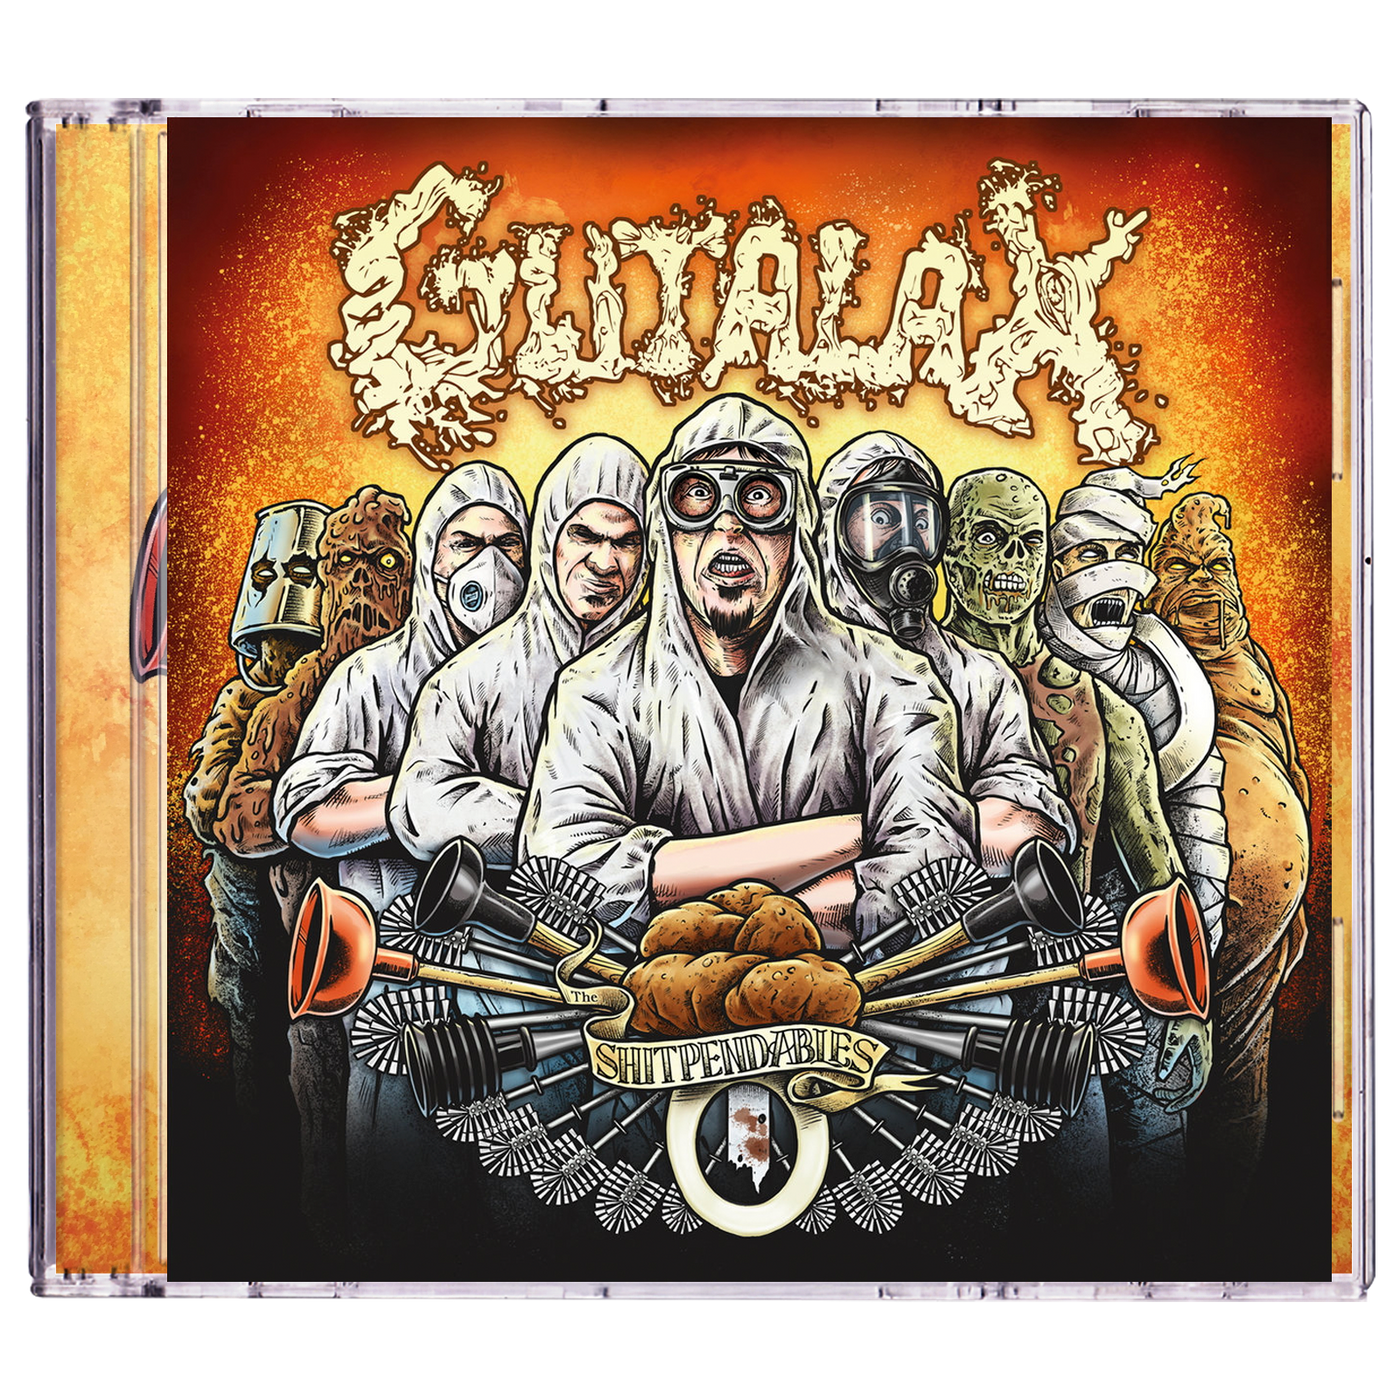 Gutalax 'The Shitpendables' CD